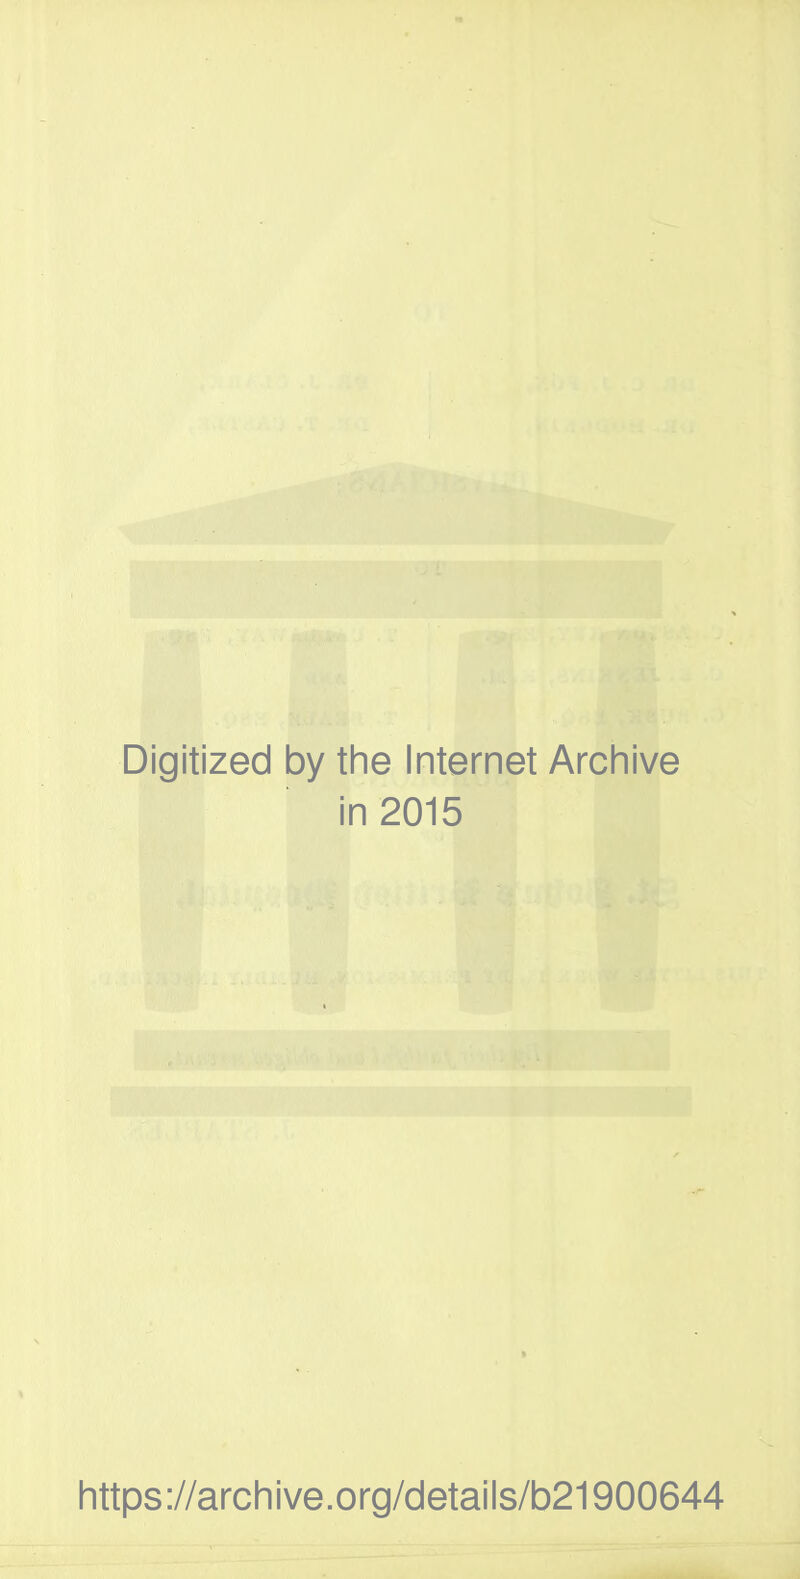 Digitized by the Internet Archive in 2015 https://archive.org/details/b21900644